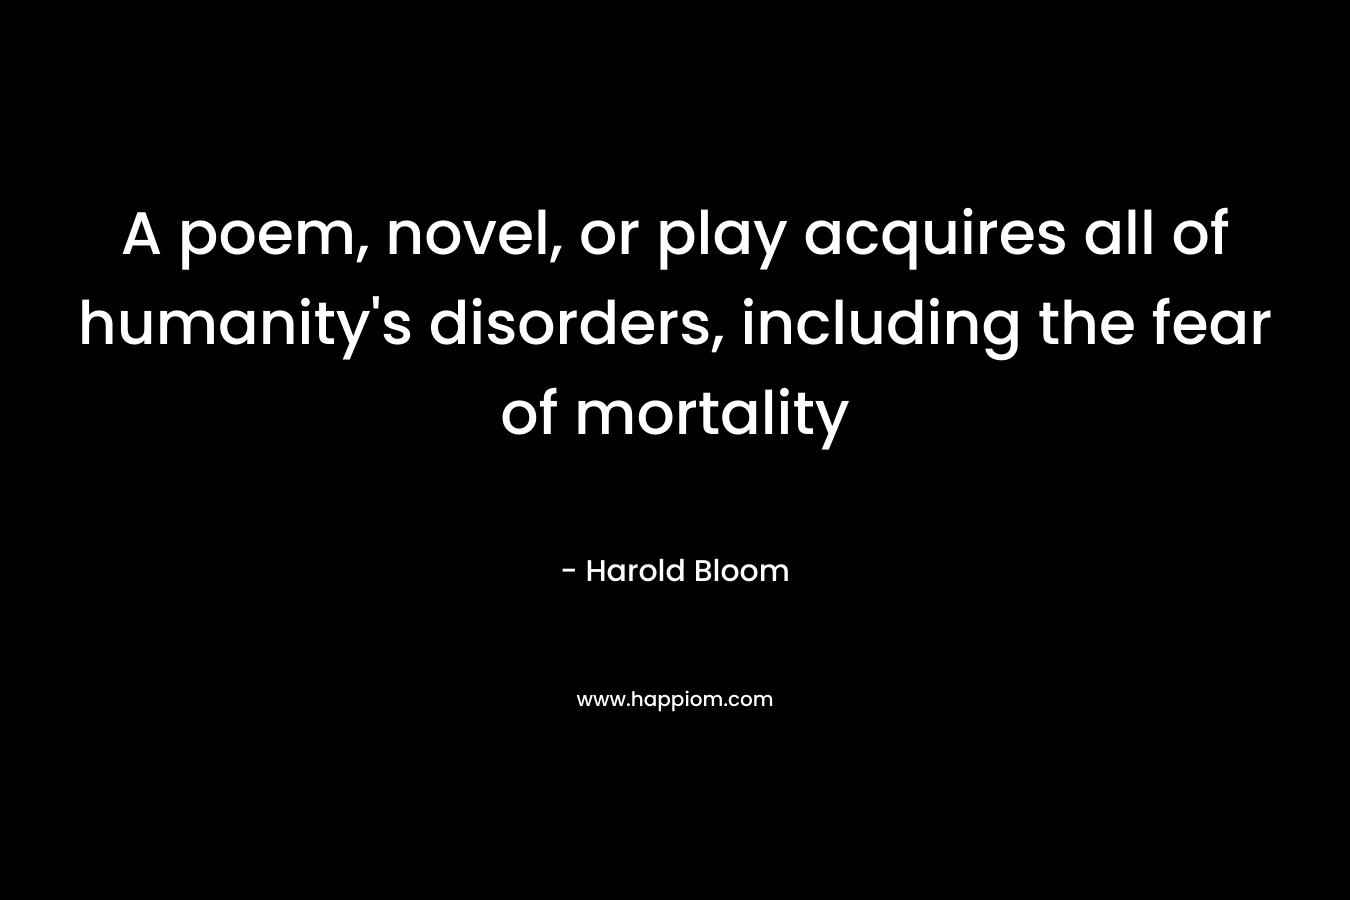 A poem, novel, or play acquires all of humanity's disorders, including the fear of mortality